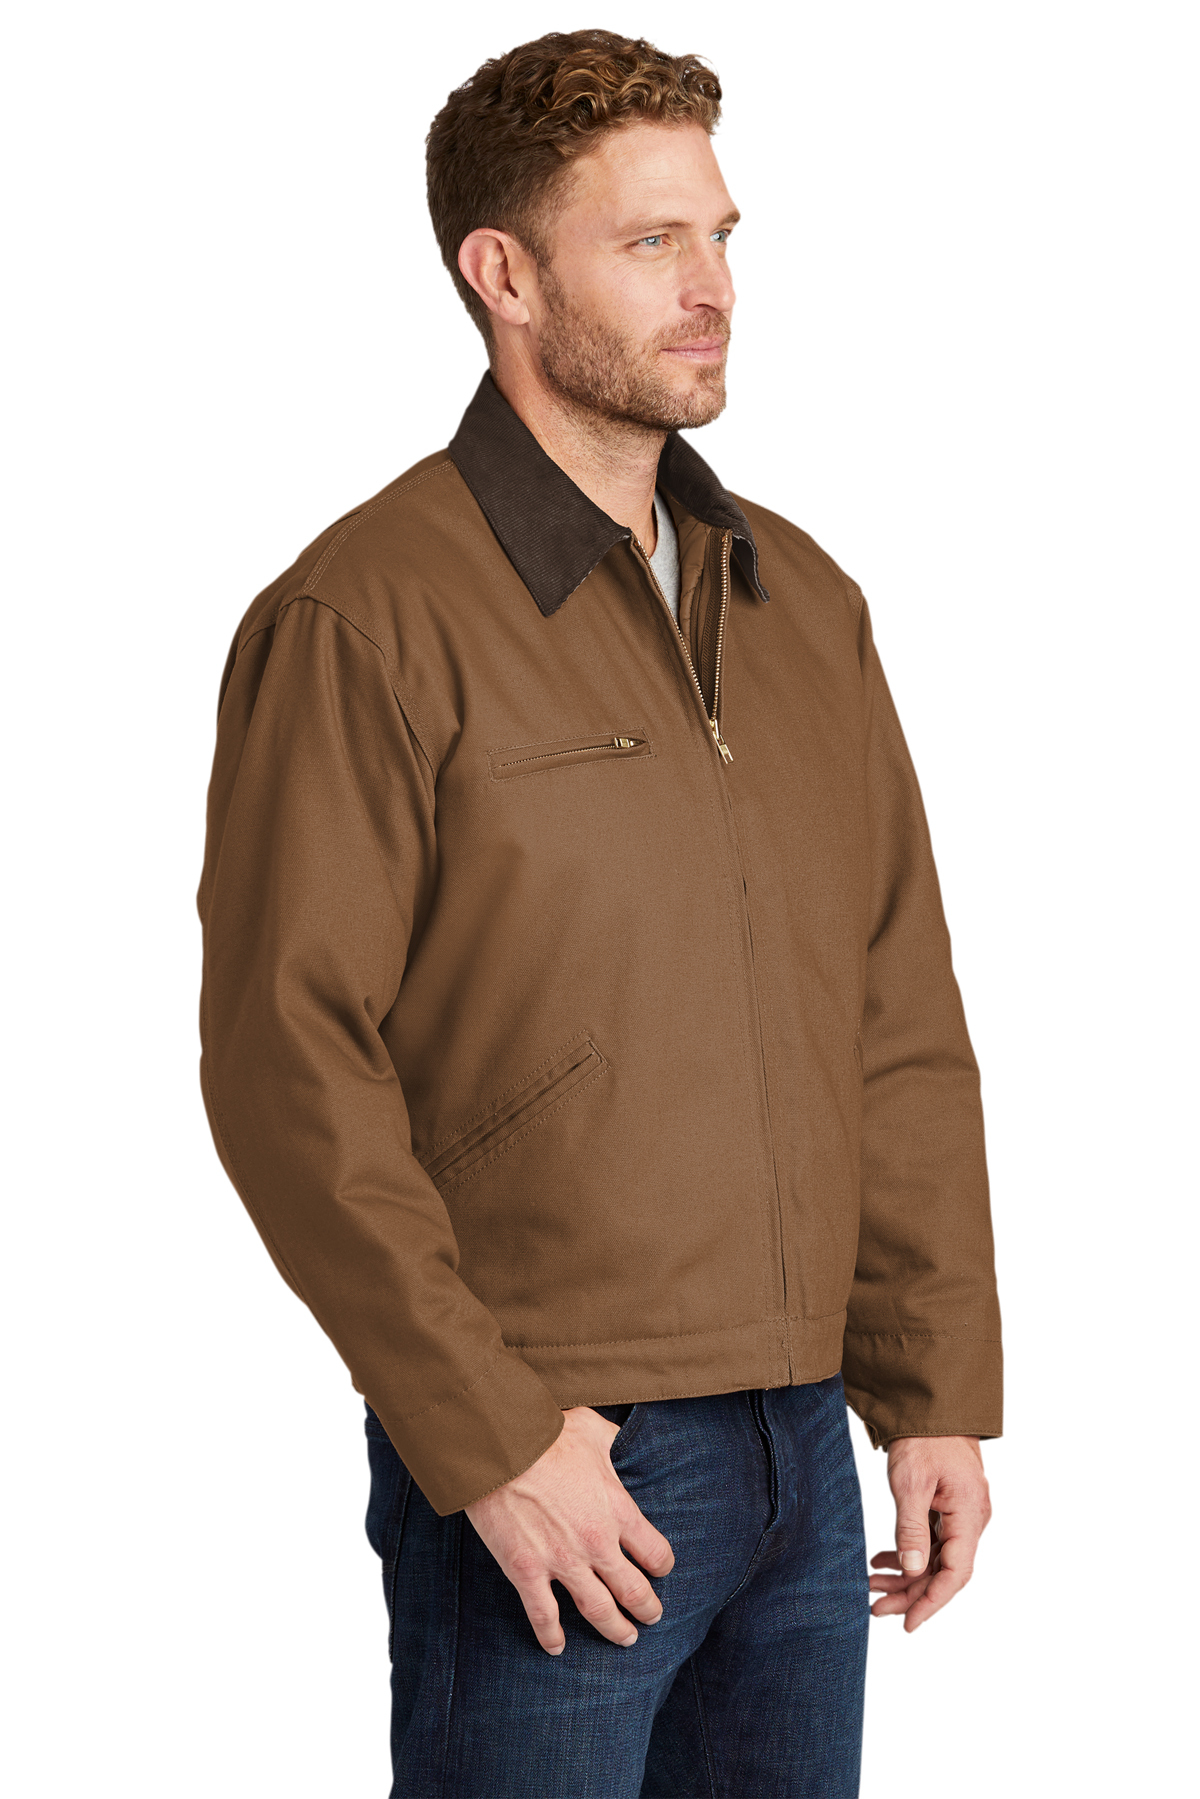 CornerStone Tall Duck Cloth Work Jacket | Product | Company Casuals